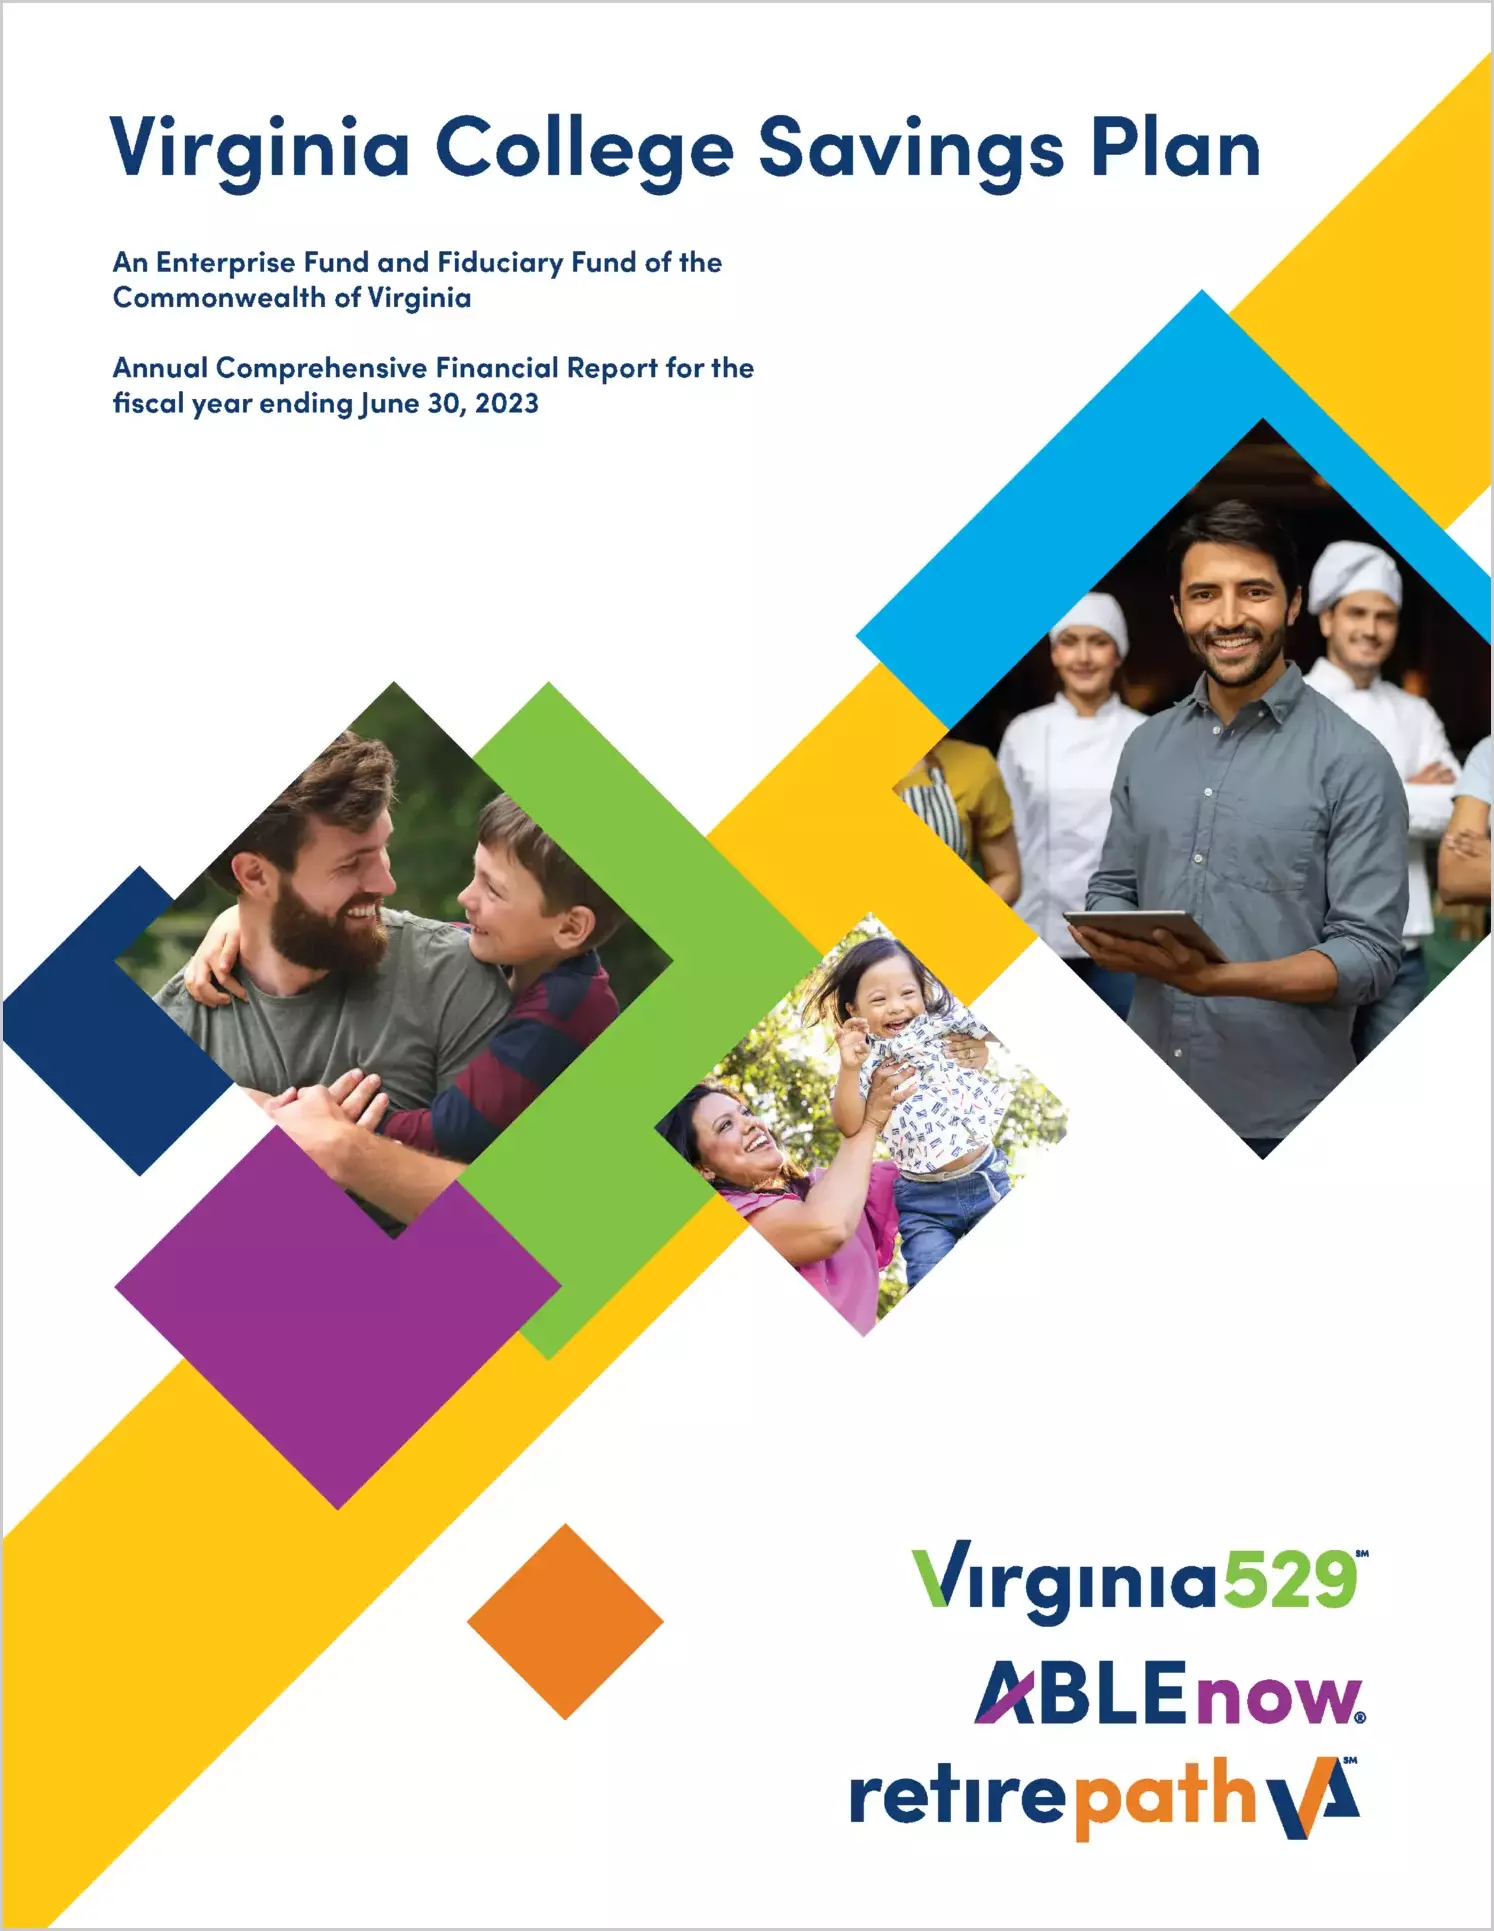 Virginia College Savings Plan Financial Statements for the year ended June 30, 2023